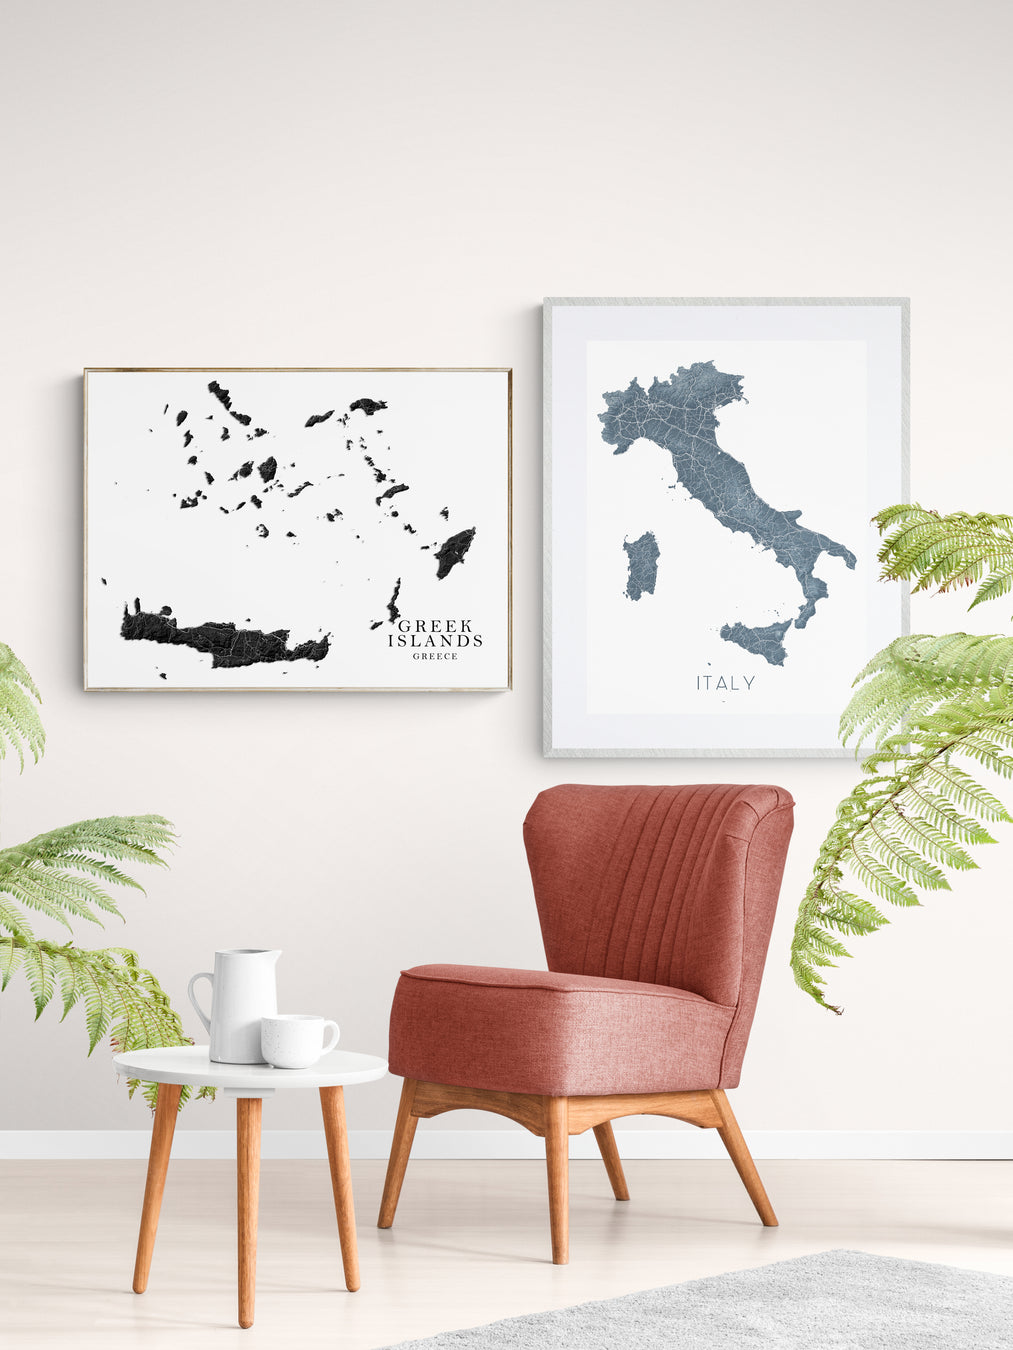 A mediterranean collection of map art prints by Maps As Art.